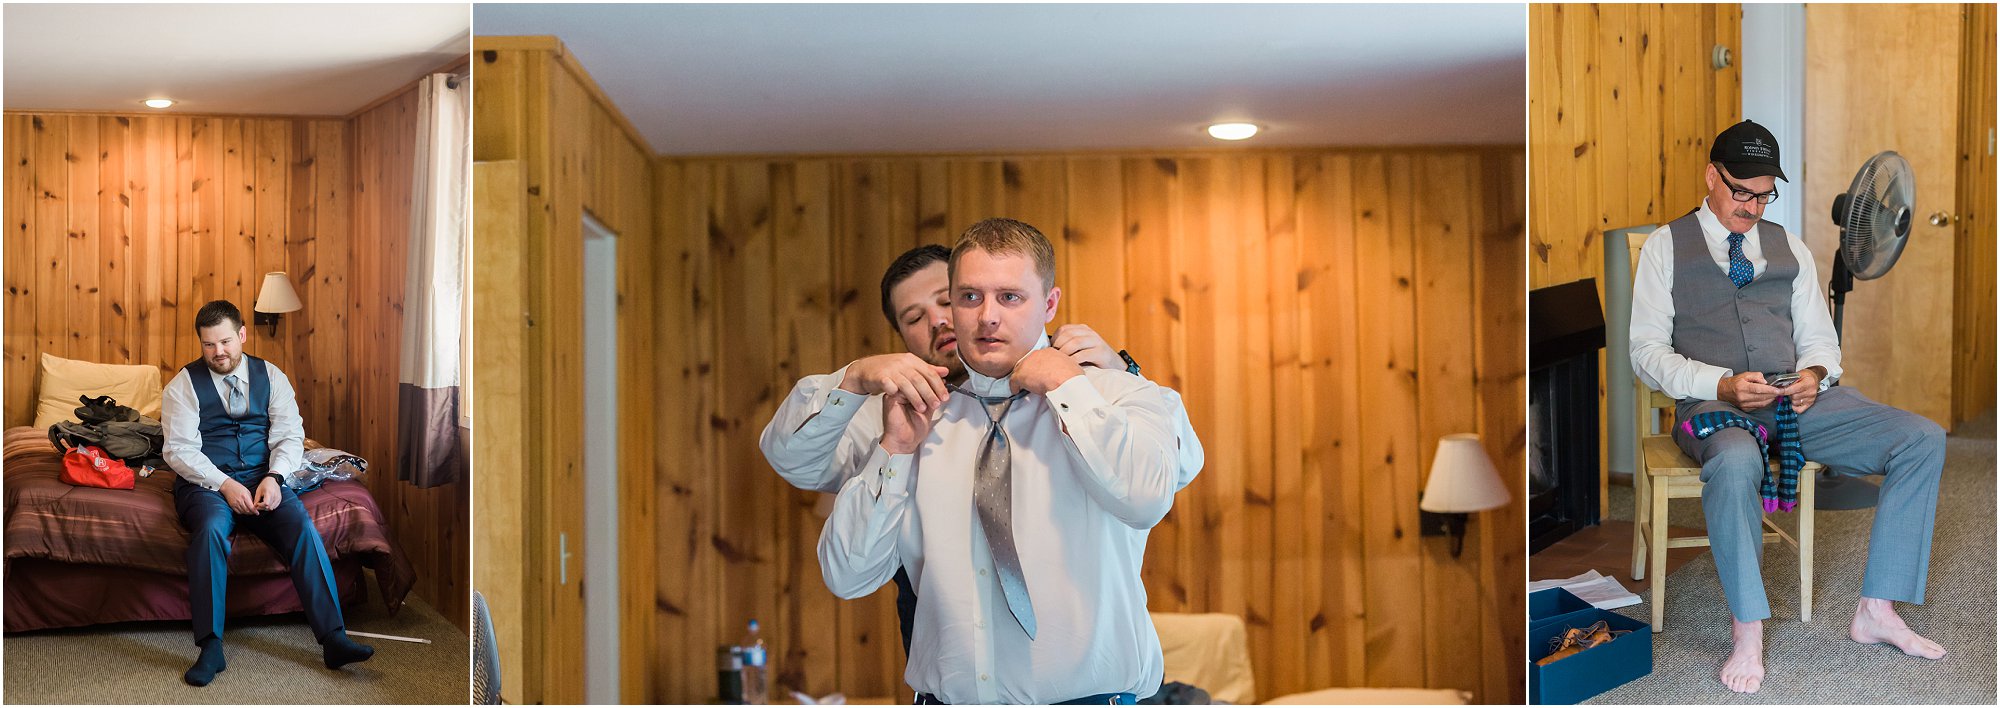 The groomsmen and father of the bride get ready in their rustic cabin at the Rock Springs Ranch wedding venue in Bend, OR. | Erica Swantek Photography